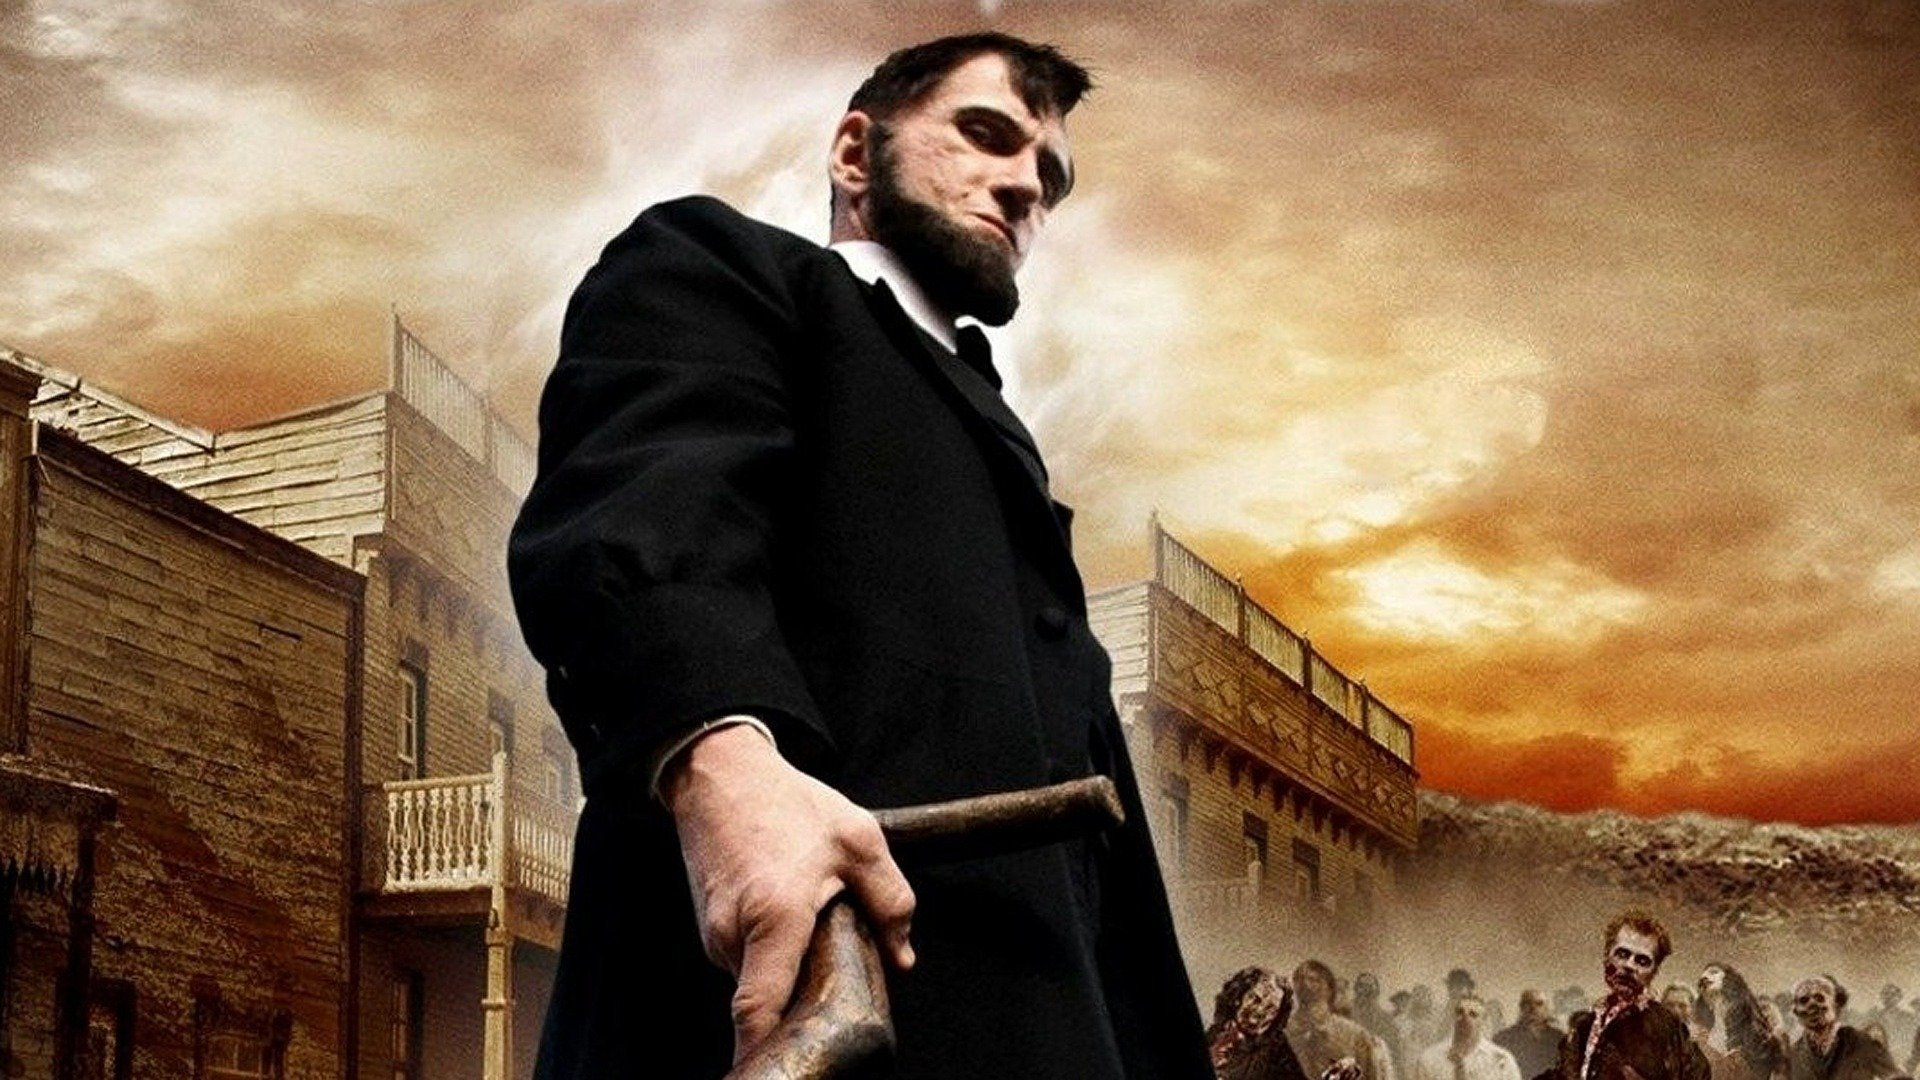 Abraham lincoln vs Zombies